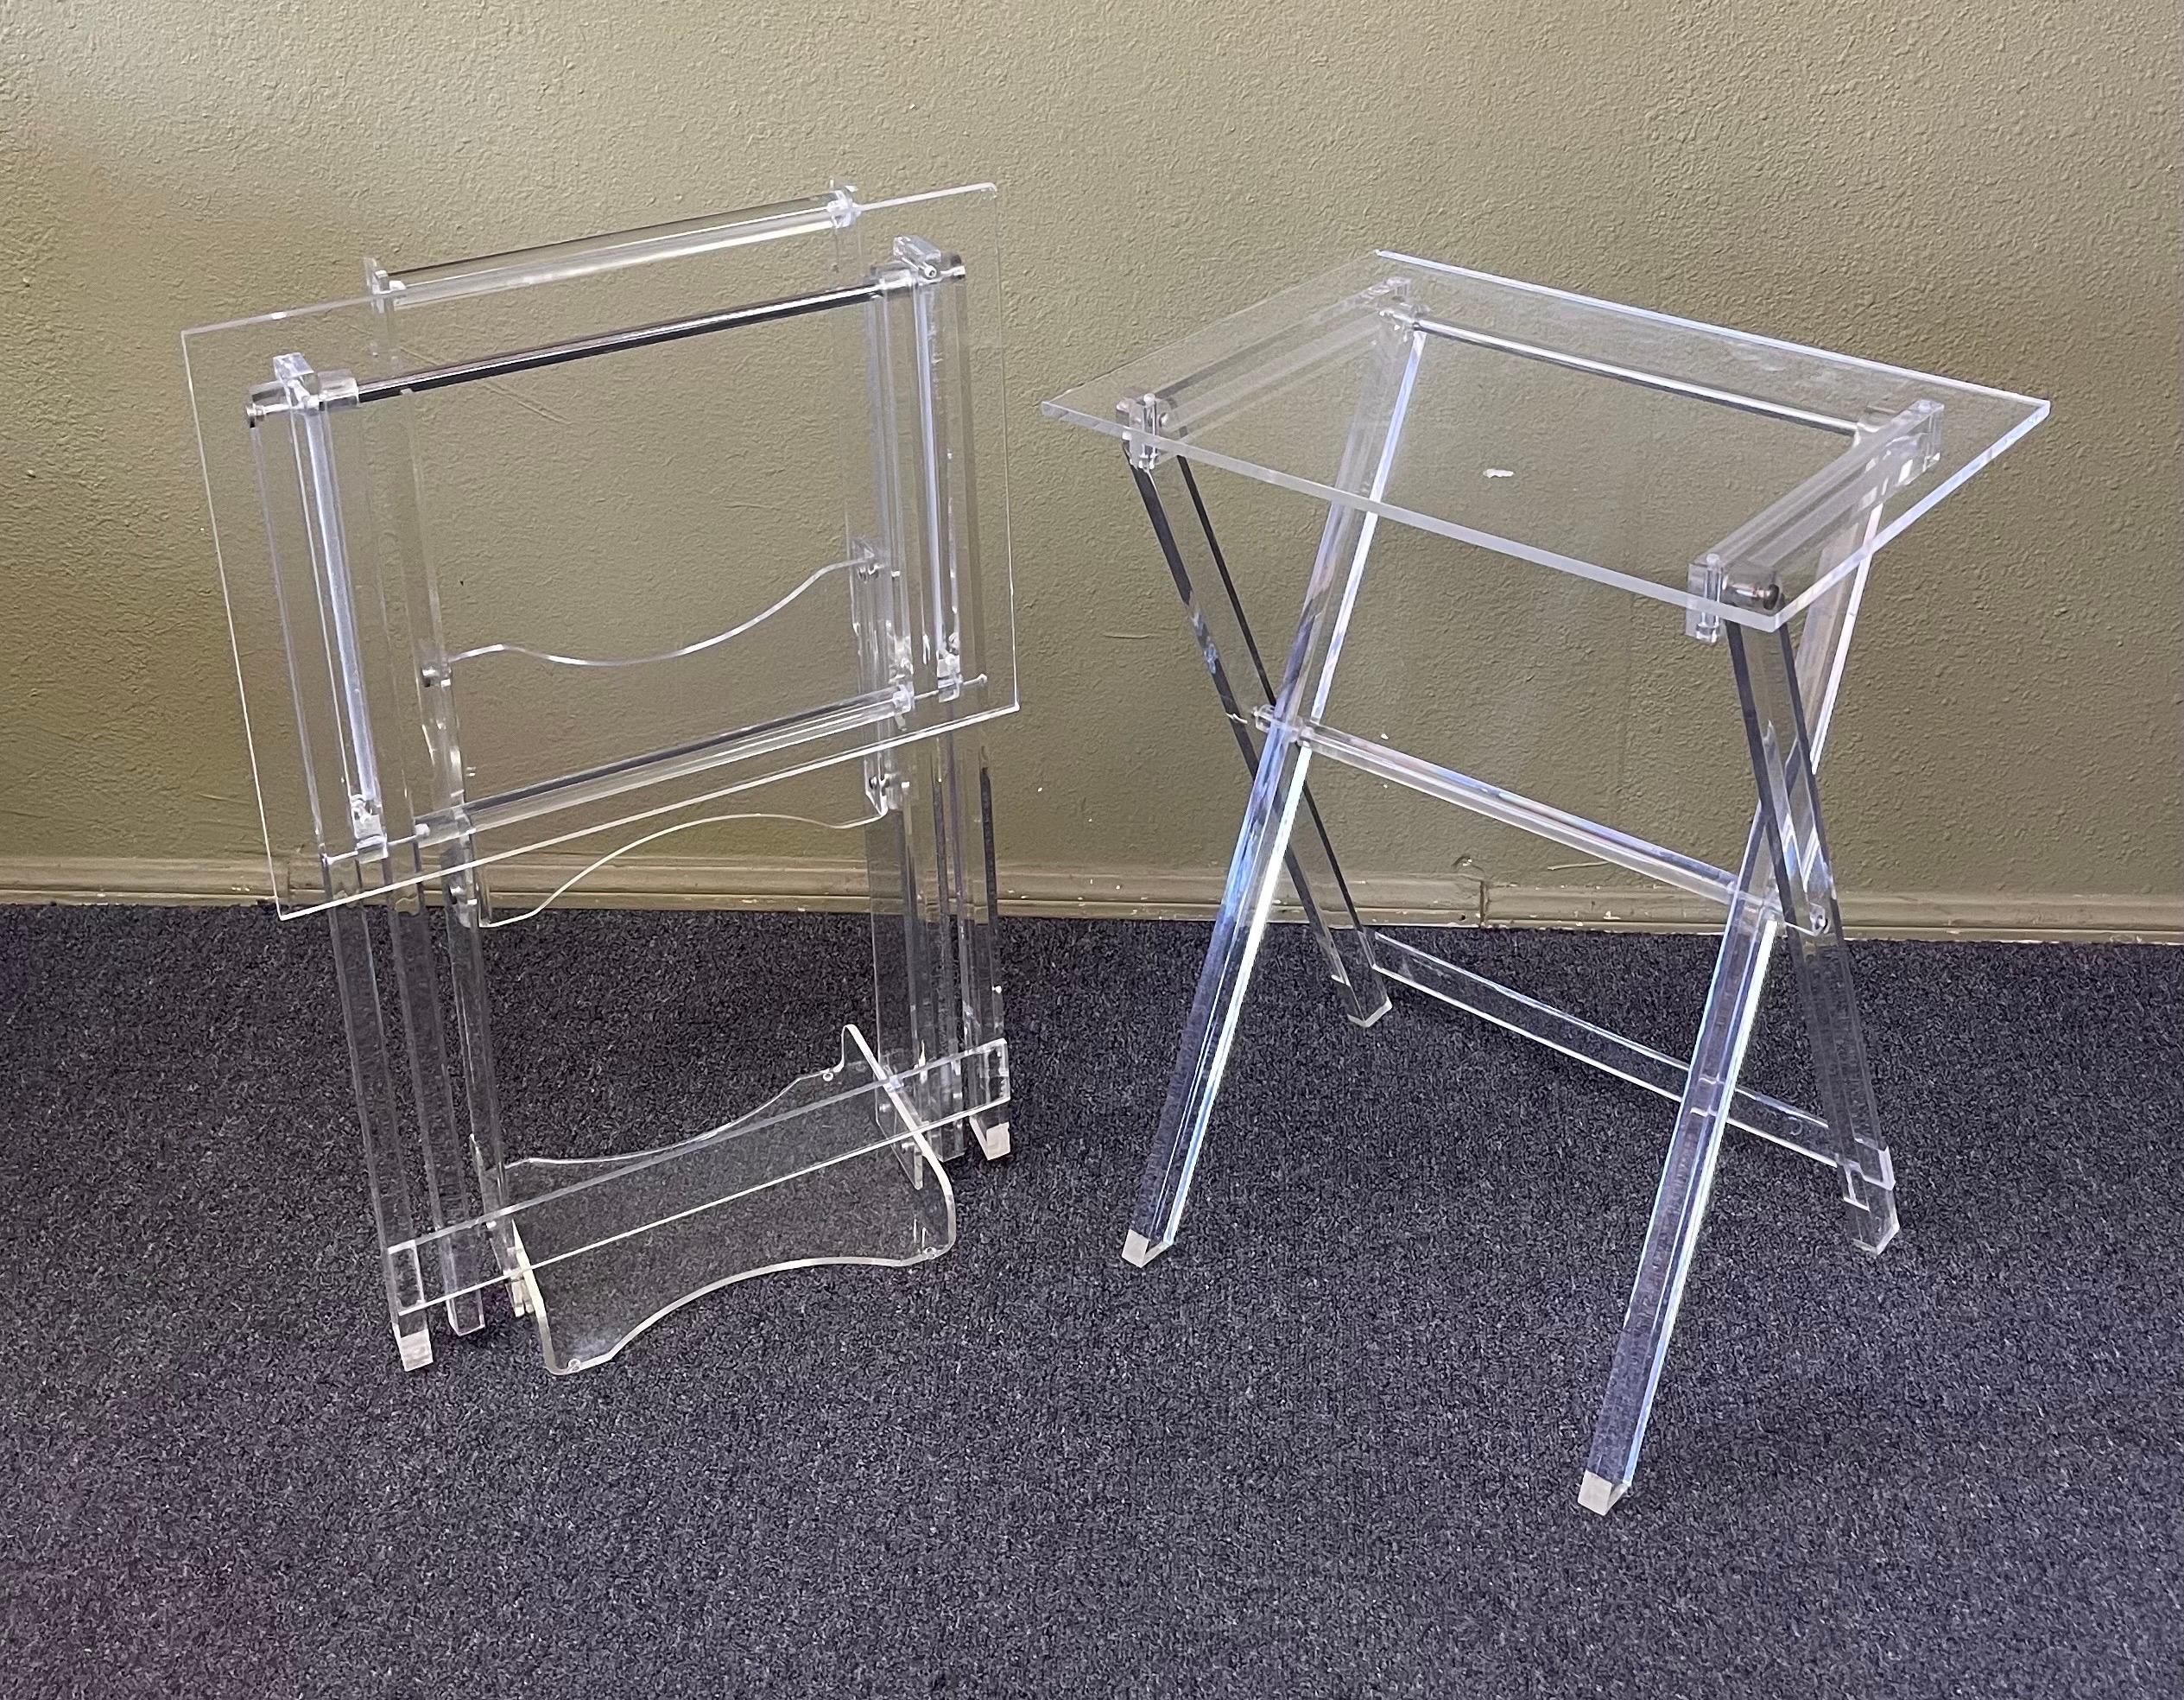 A very nice set (stand and two tray tables) of MCM lucite folding TV trays / tray tables, circa 1970s. The set is in good vintage condition with some minor crazing and scratches to the lucite; on the stand, the set measures 19,75